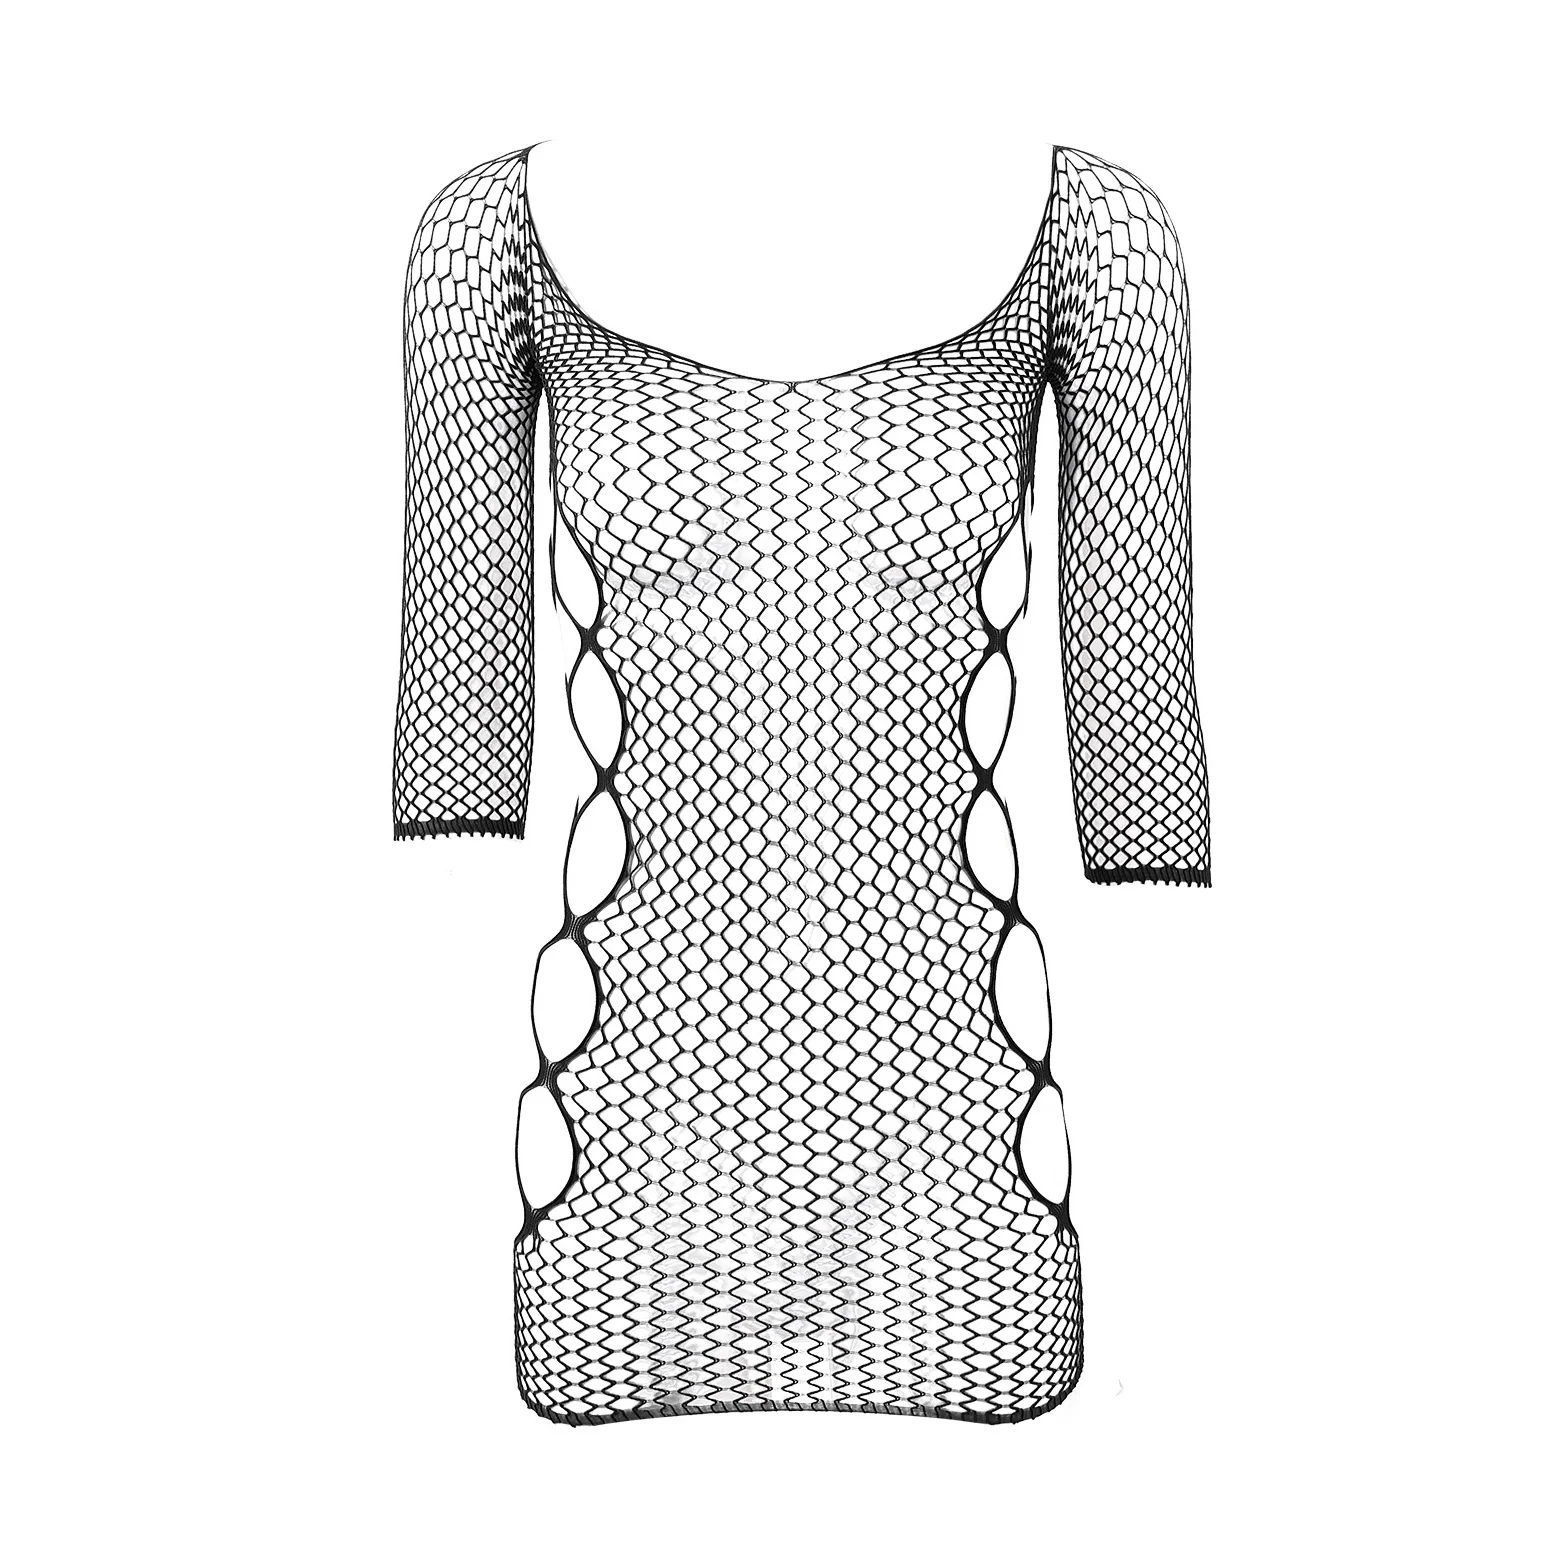 

Women Hollow Out Transparent Fishnet Babydoll Dresses Sexy Lingerie Porn Underwear Long Sleeves Stretchy Bodystocking Dress Robe